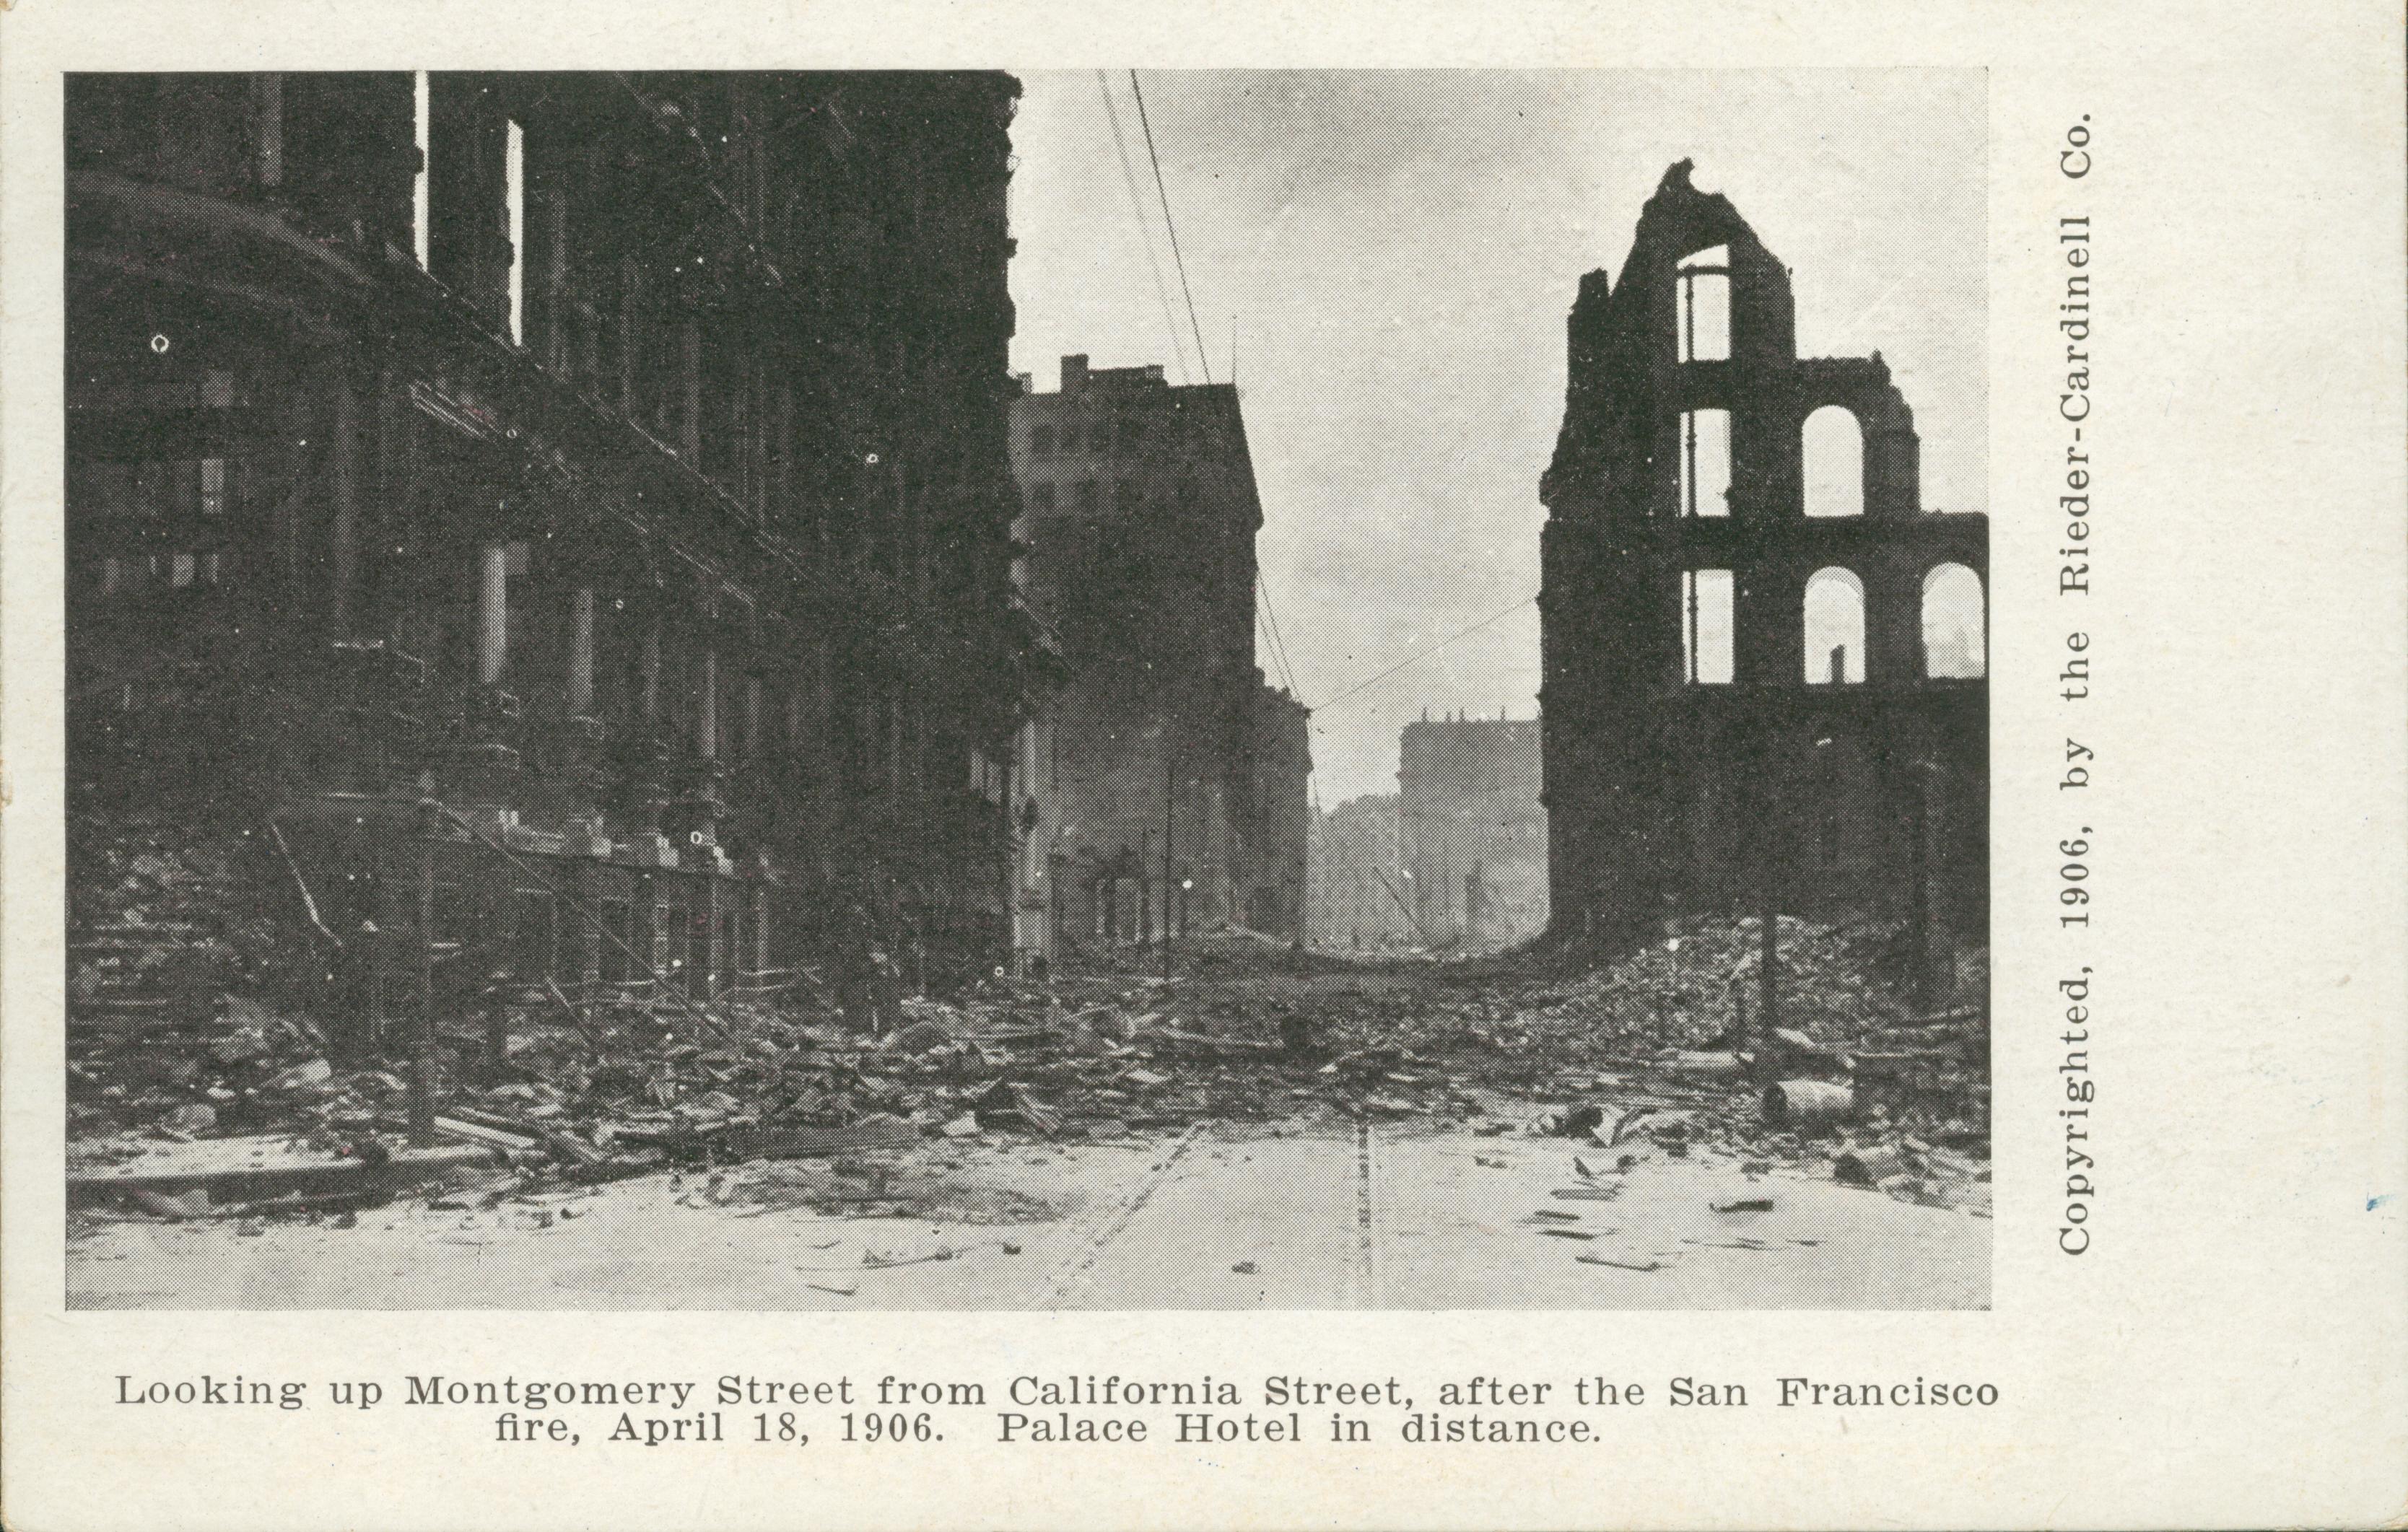 Shows destroyed building on both sides of a street with the Palace Hotel in the background.